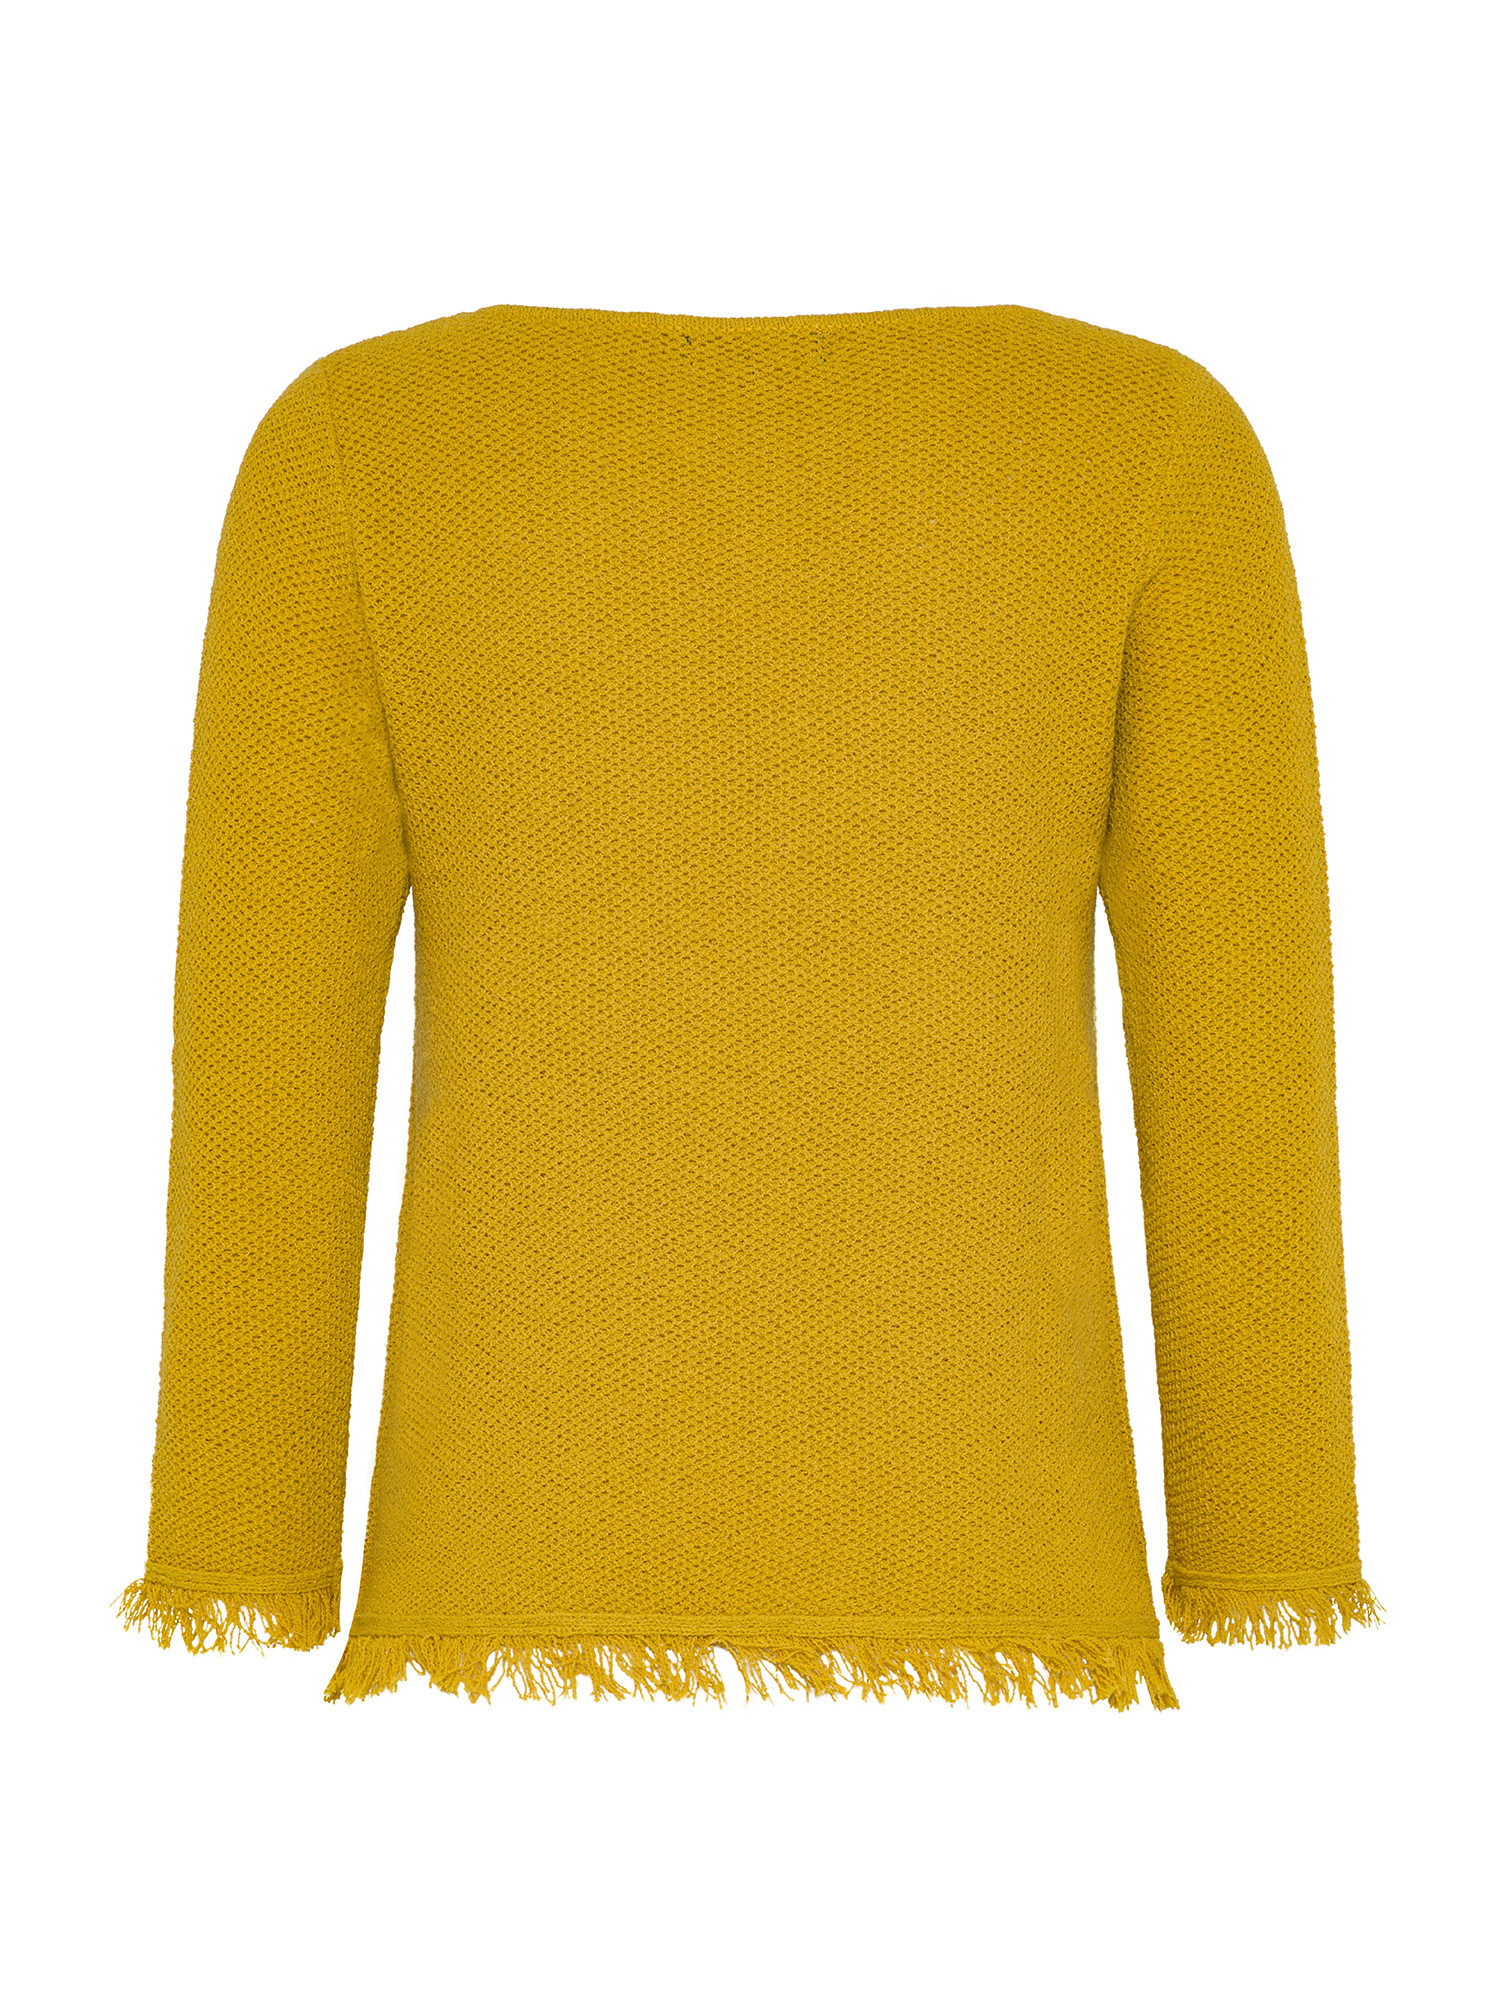 Koan - Pullover with fringes, Ocra Yellow, large image number 1